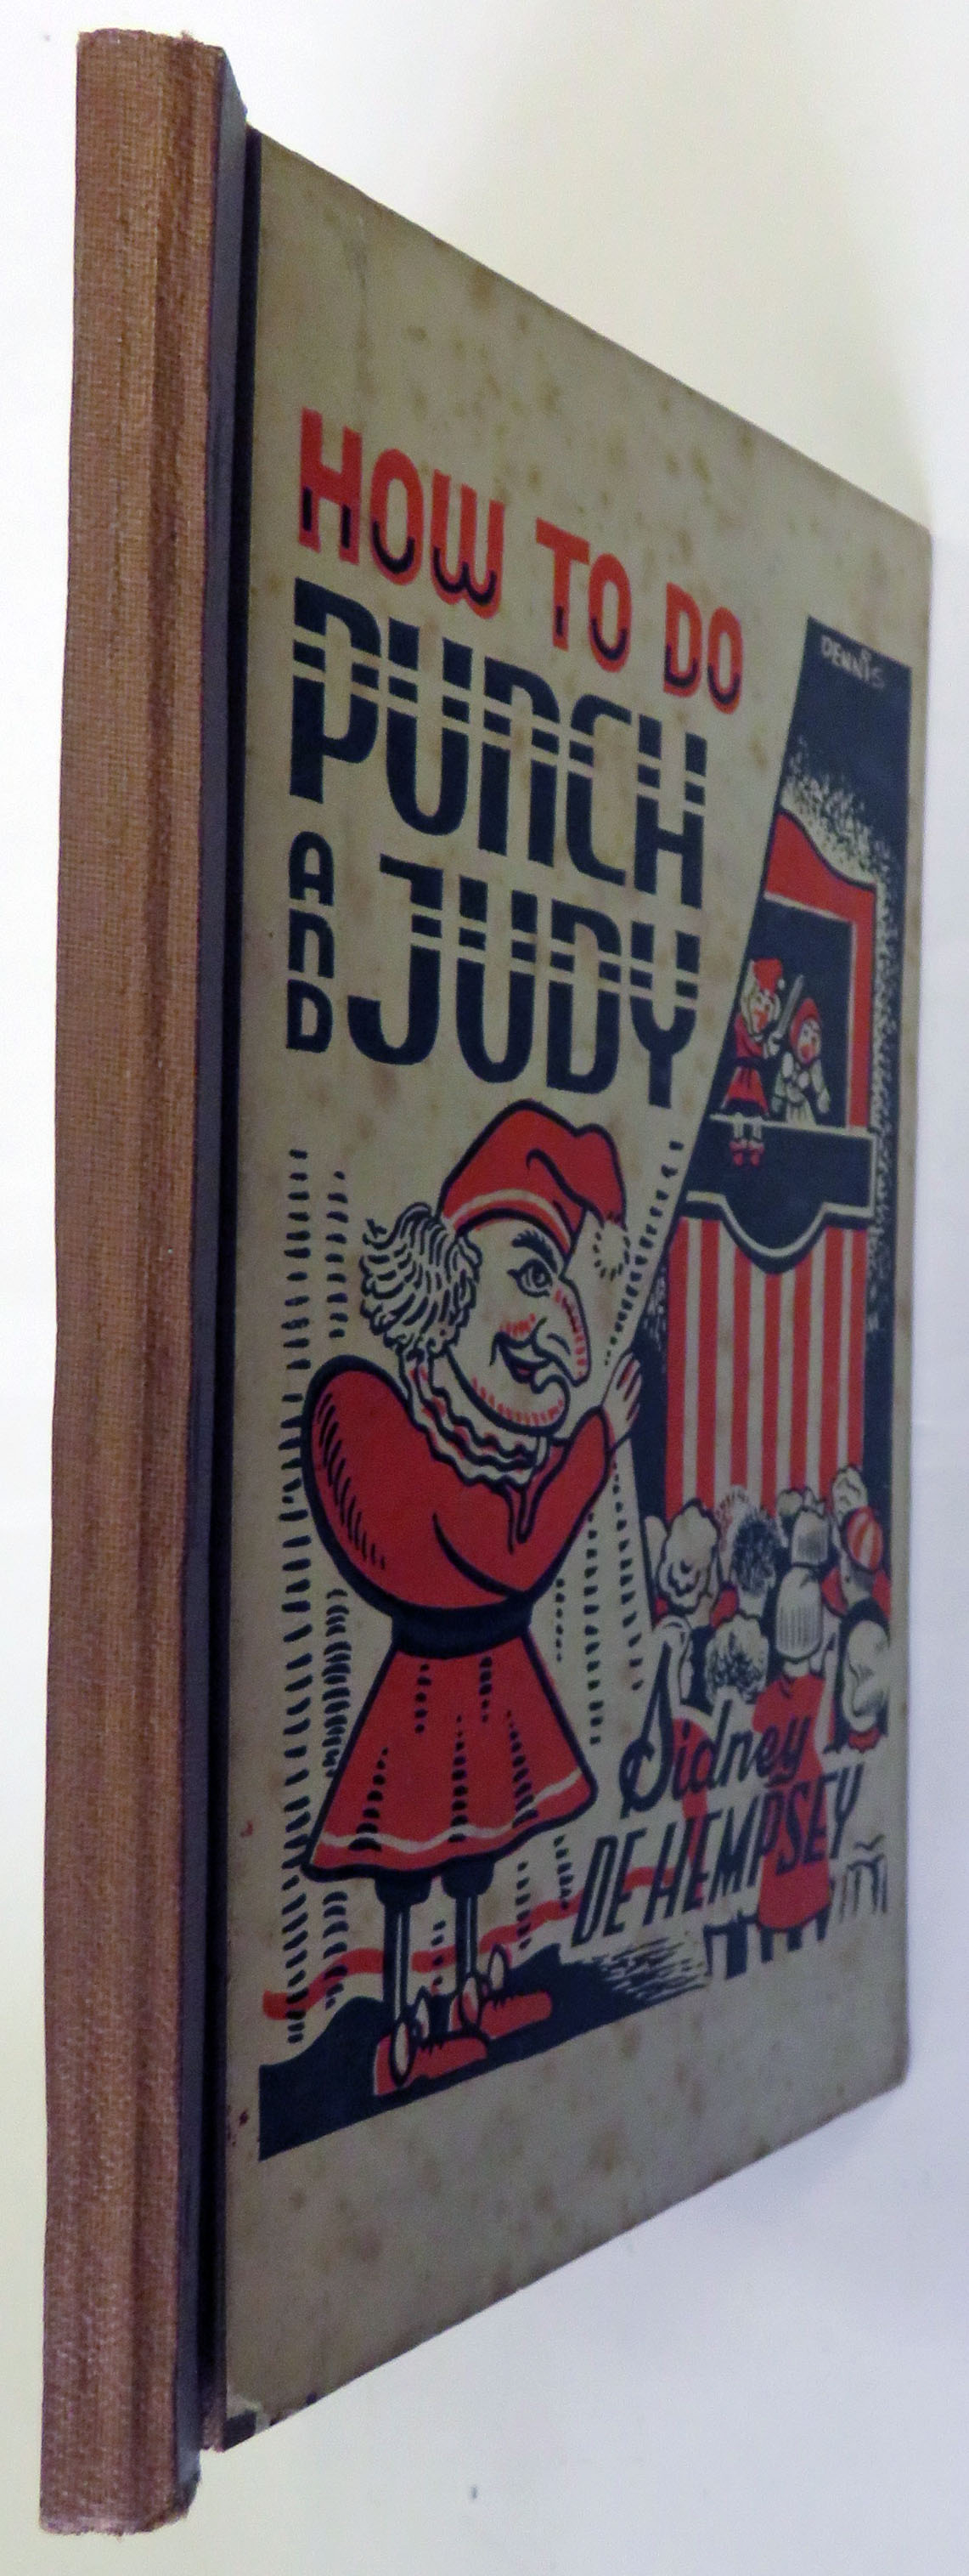 How To Do Punch & Judy